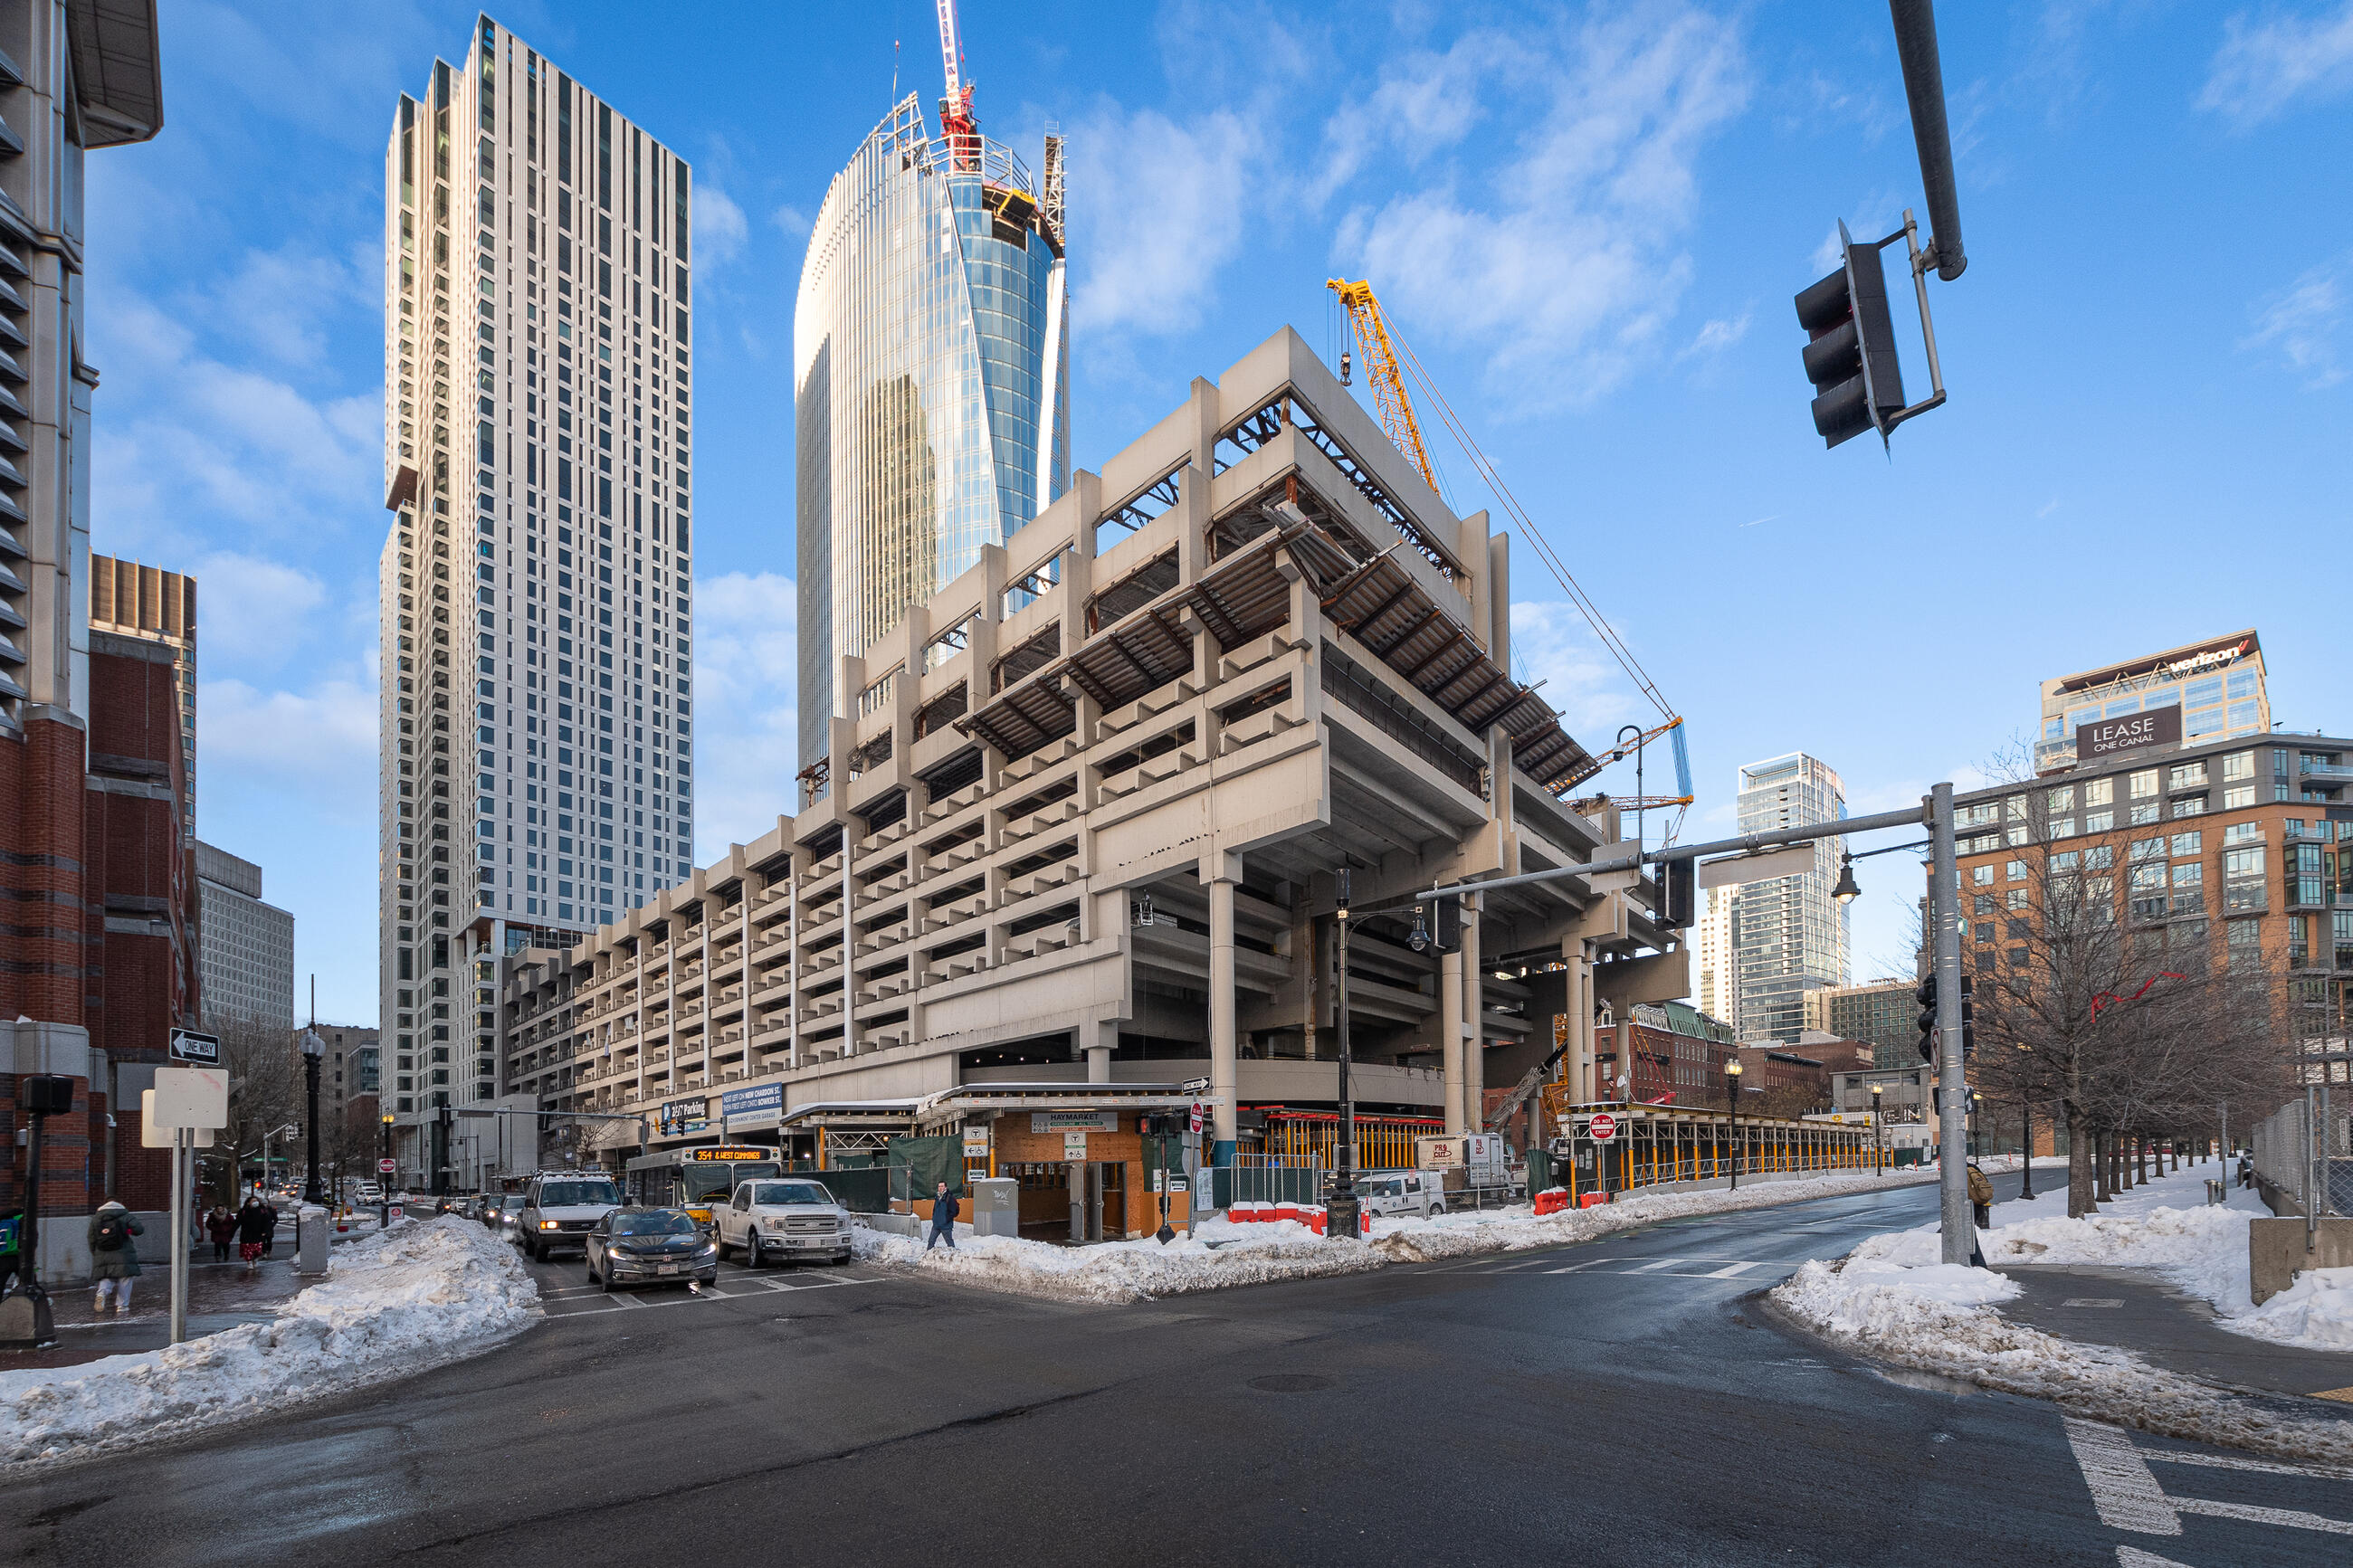 The Government Center Garage is shown at center with cross streets in front and tall buildings behind. Two large construction cranes sit atop the garage, and another is at street level in front of the garage at right.  